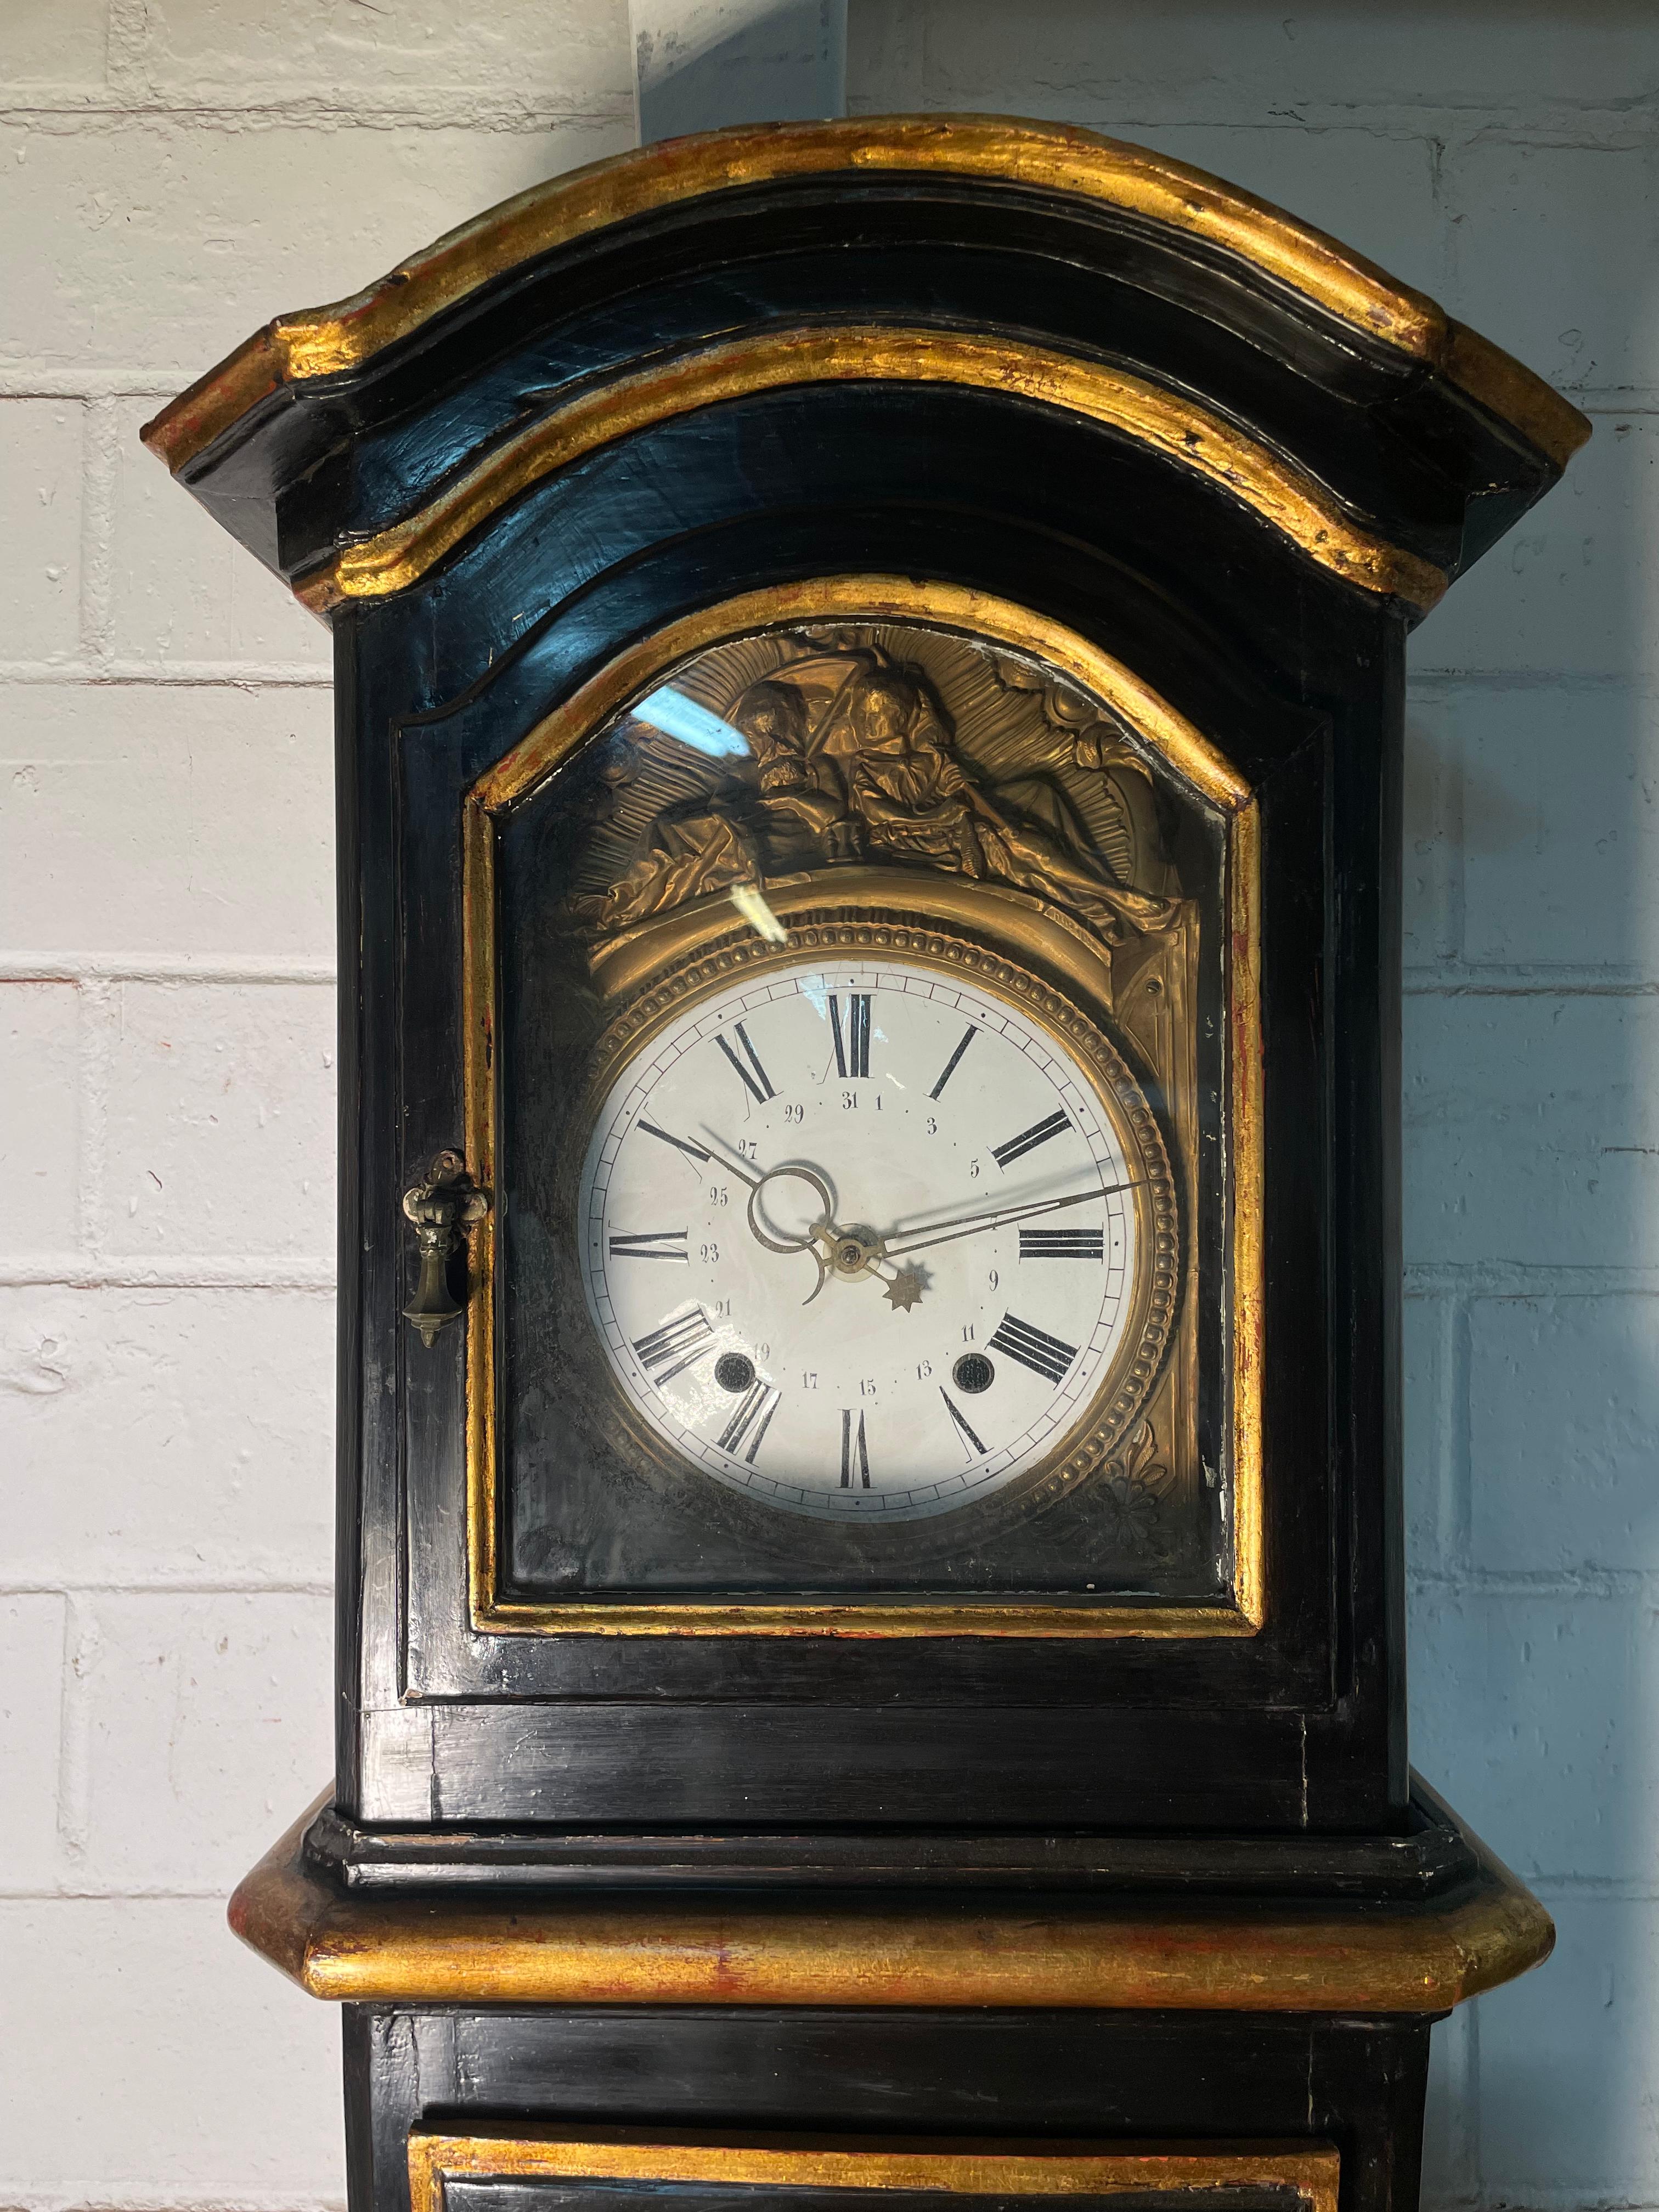 This 19th Century Grandfather Clock is decorated with hand-painted, gold leaf chinoiserie. The black lacquer case with gilded and painted Scottish landscapes; where the sheep are grazing, men are fishing and walking along a rocky road. Scenes of